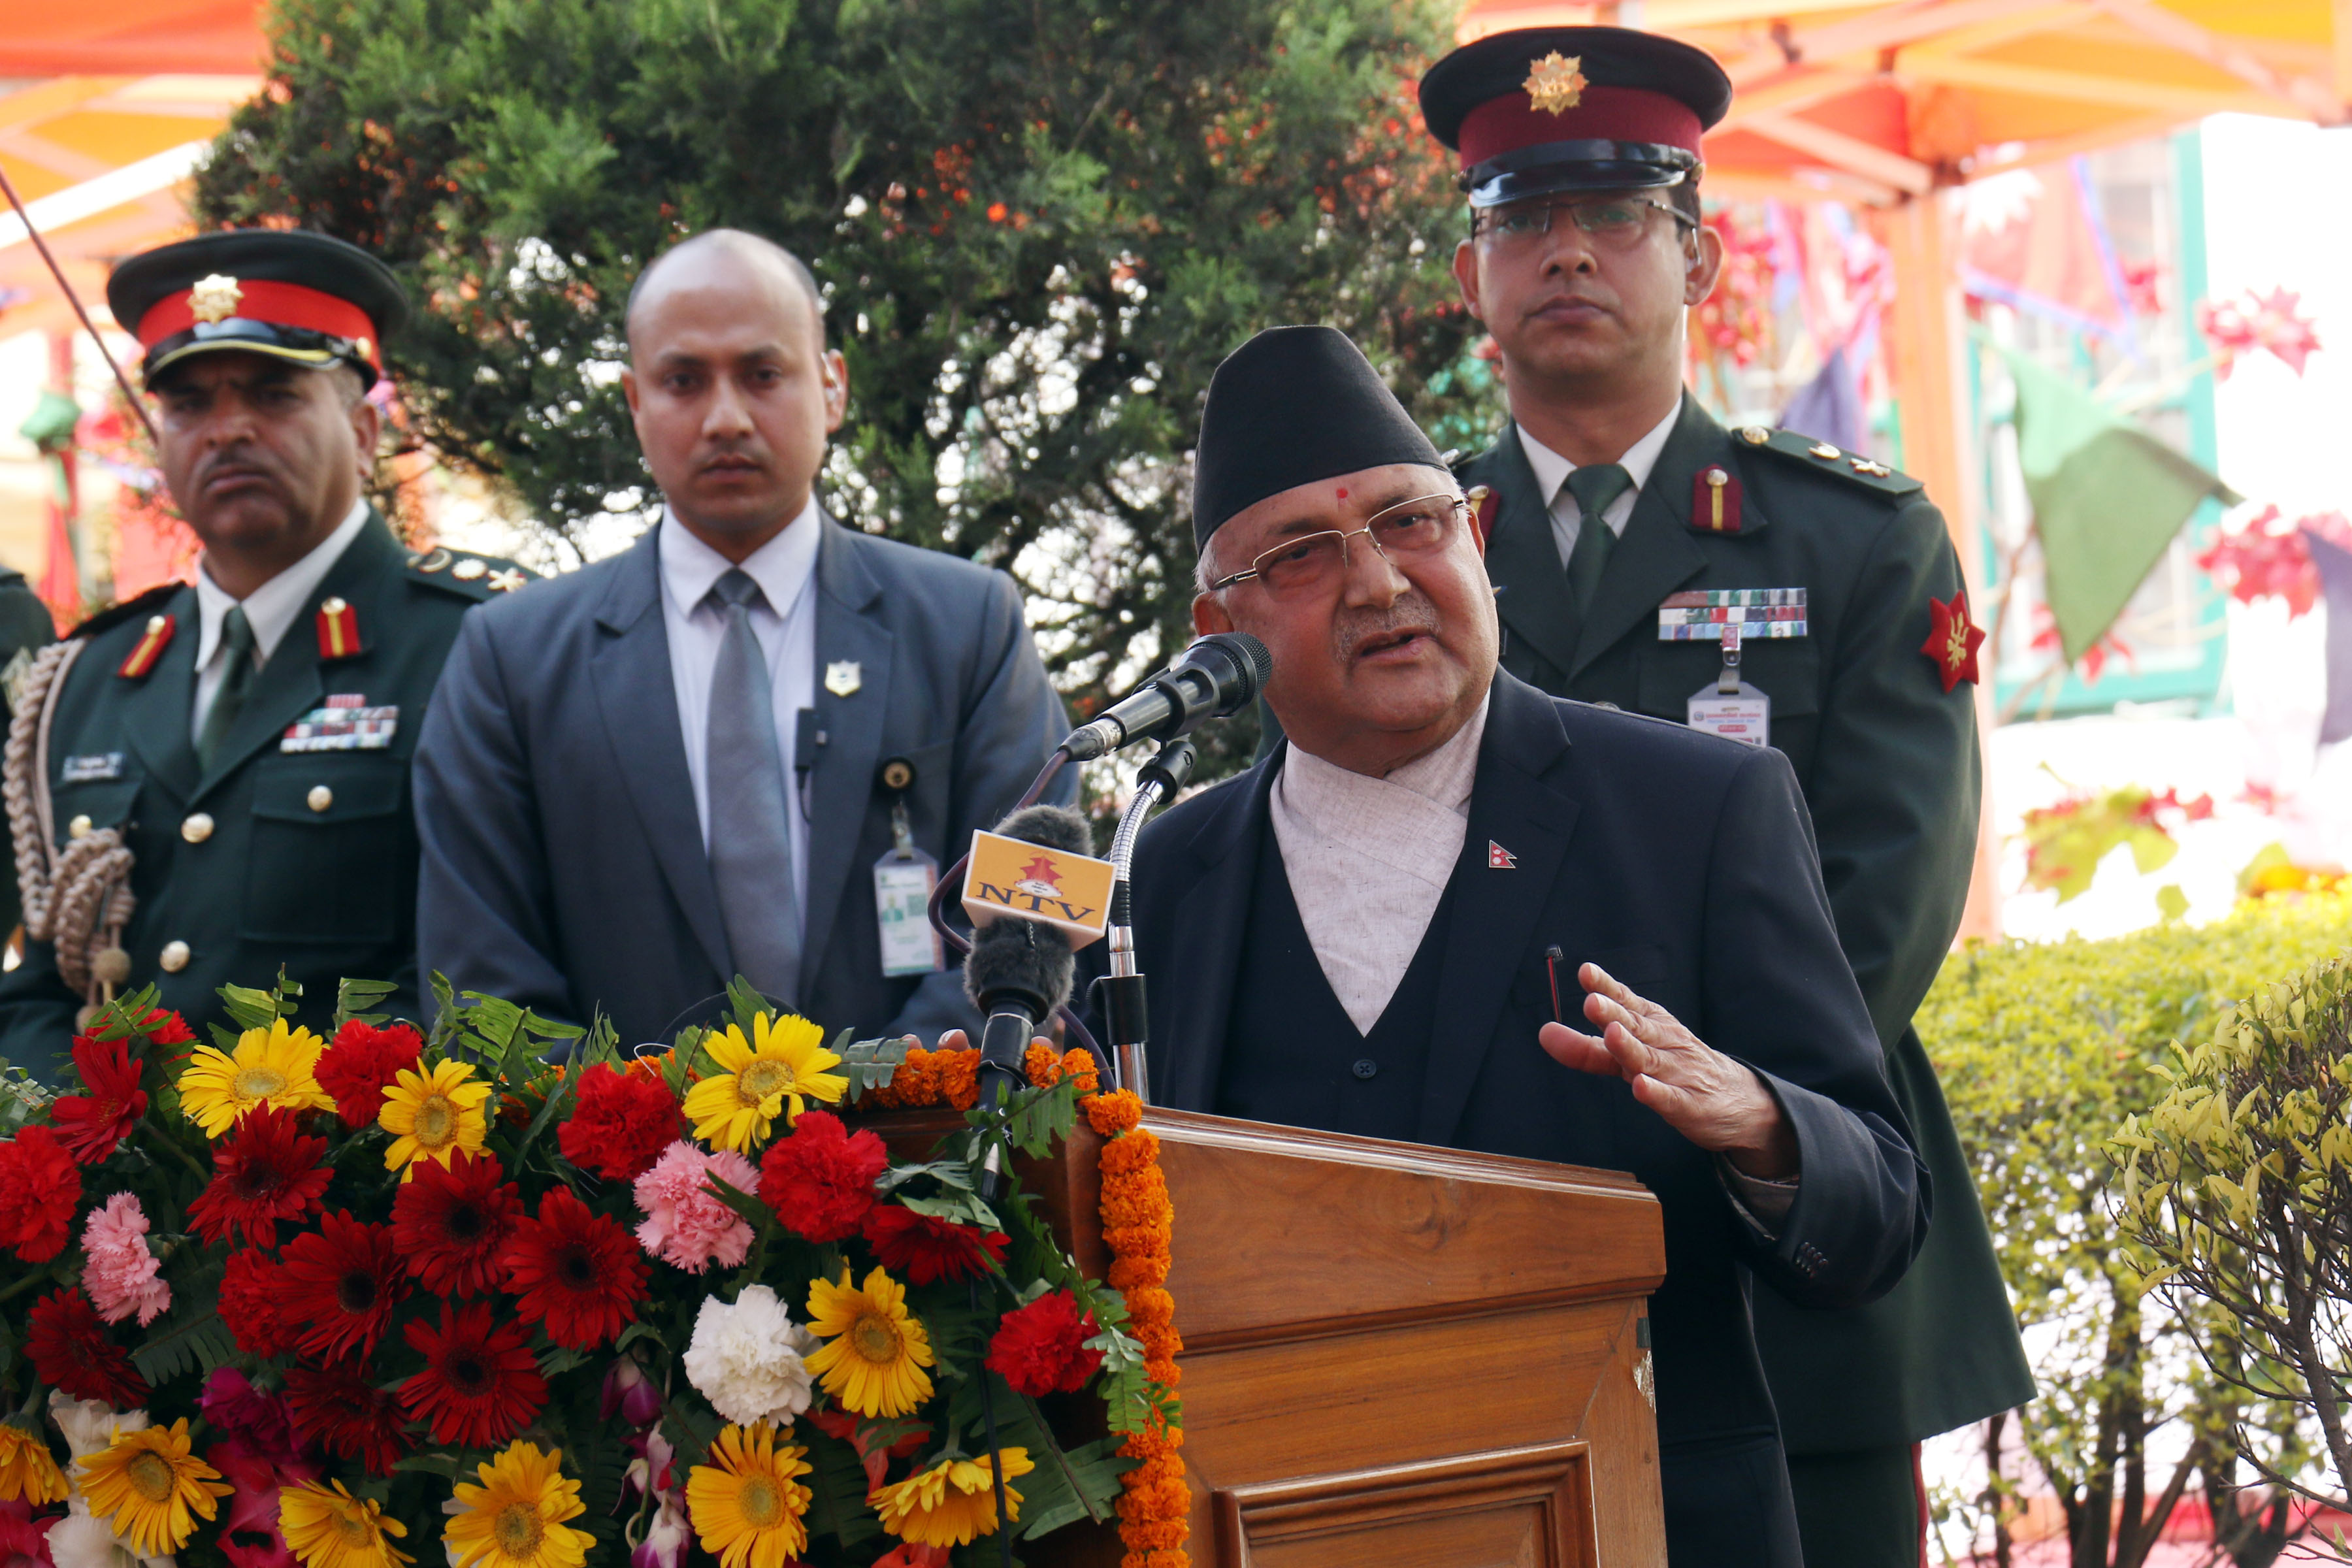 No referendum at the cost of national sovereignty and integrity : PM Oli